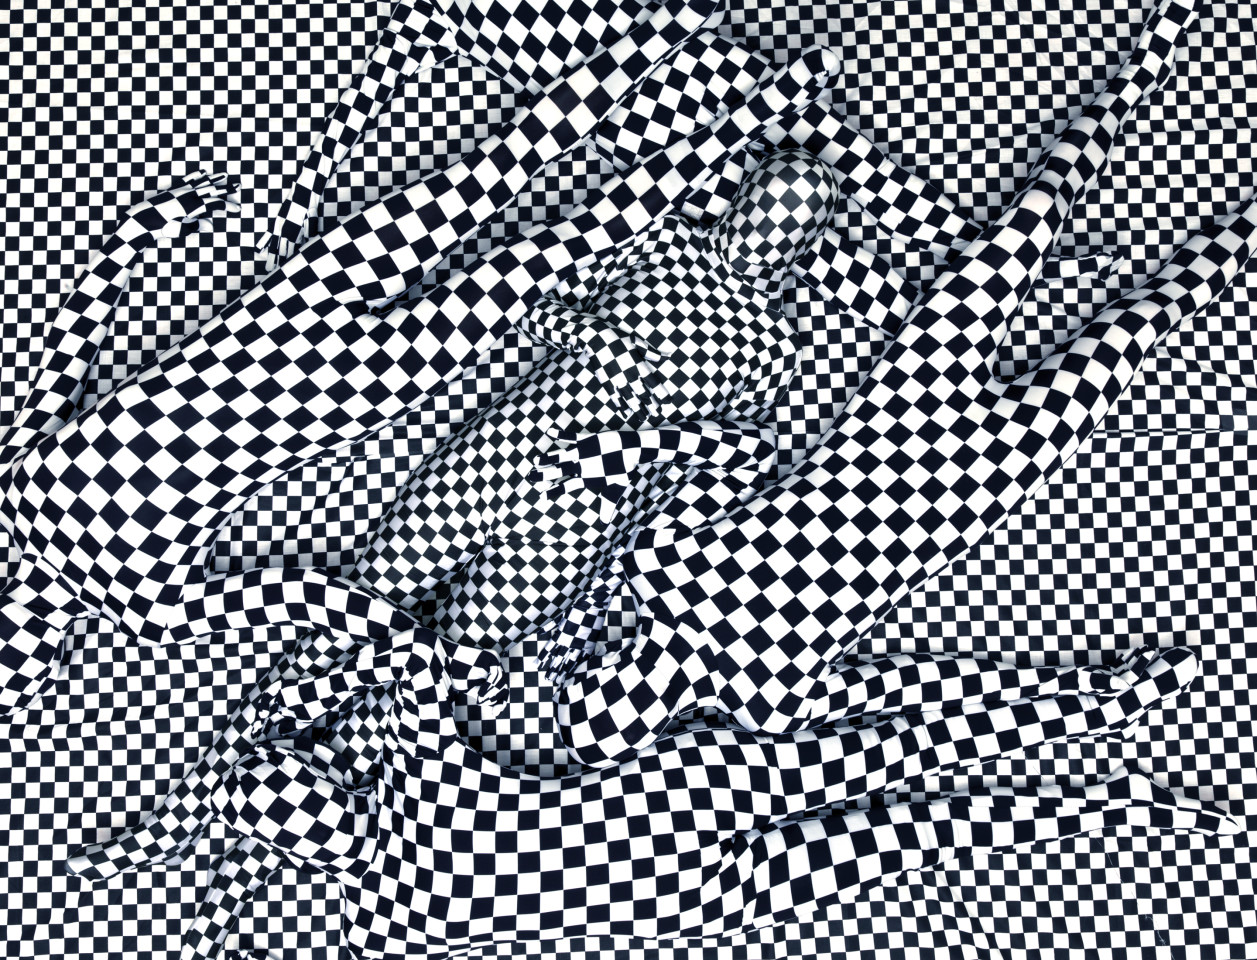 Olaf Breuning, Black and white pattern people, 2013